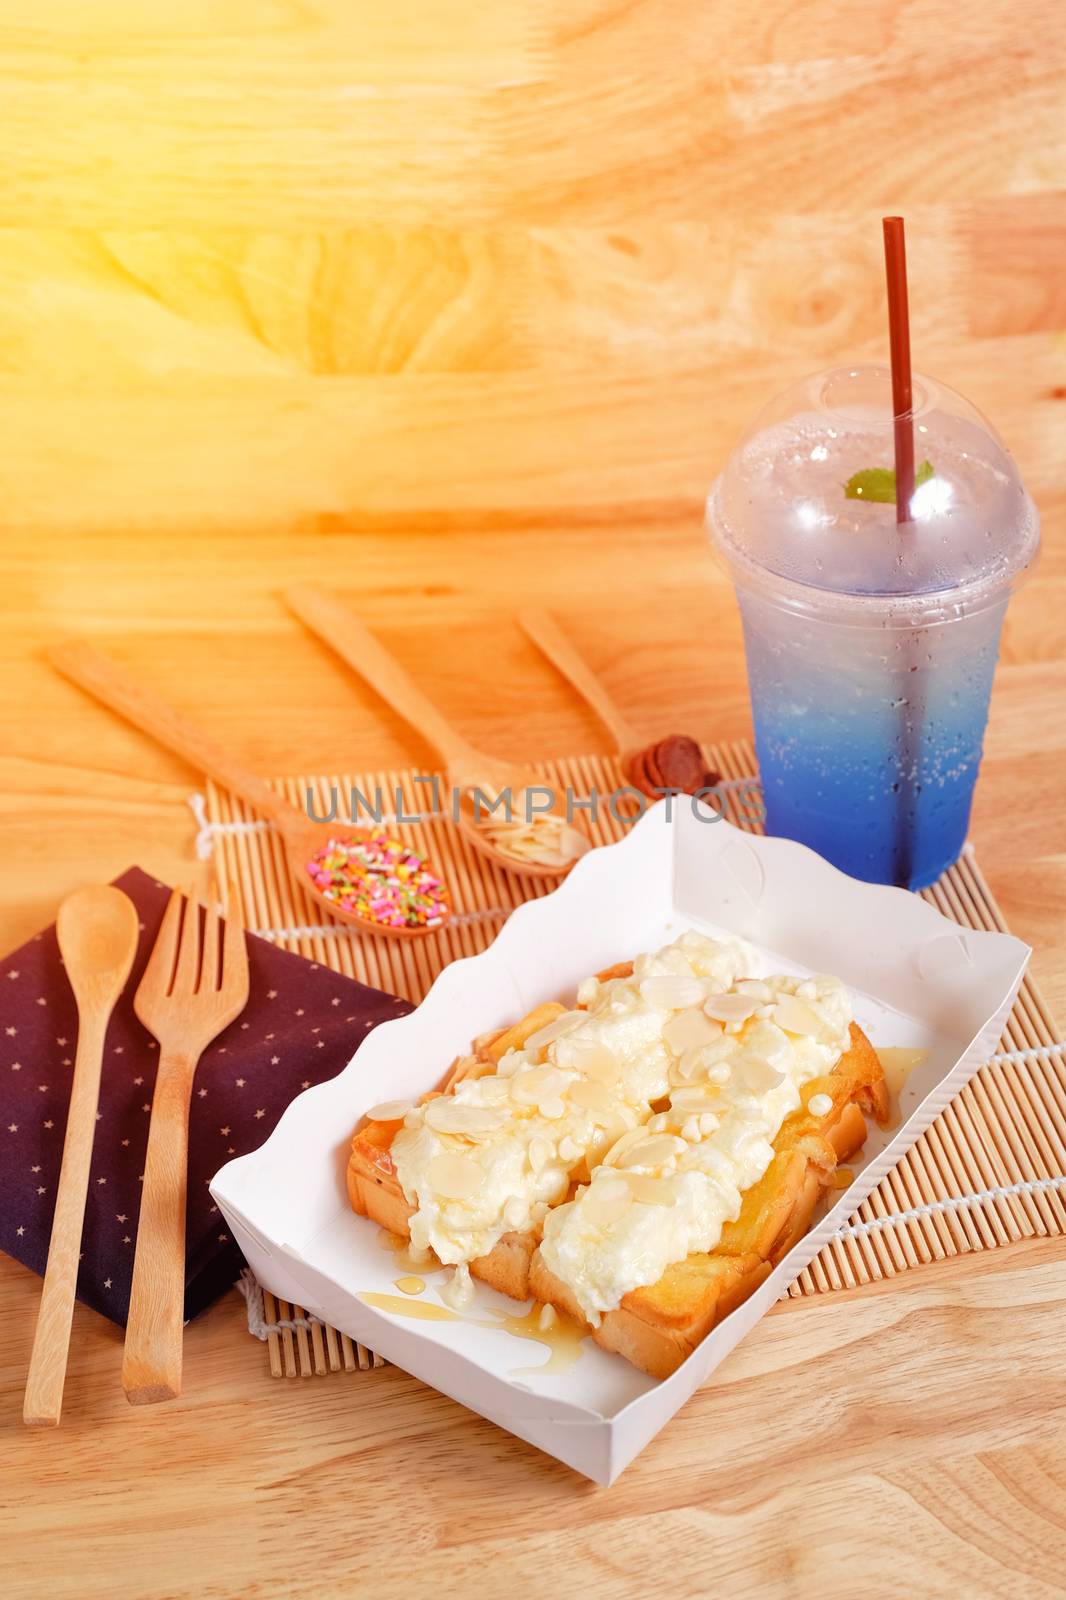 Toast butter with whip cream topping on wood background